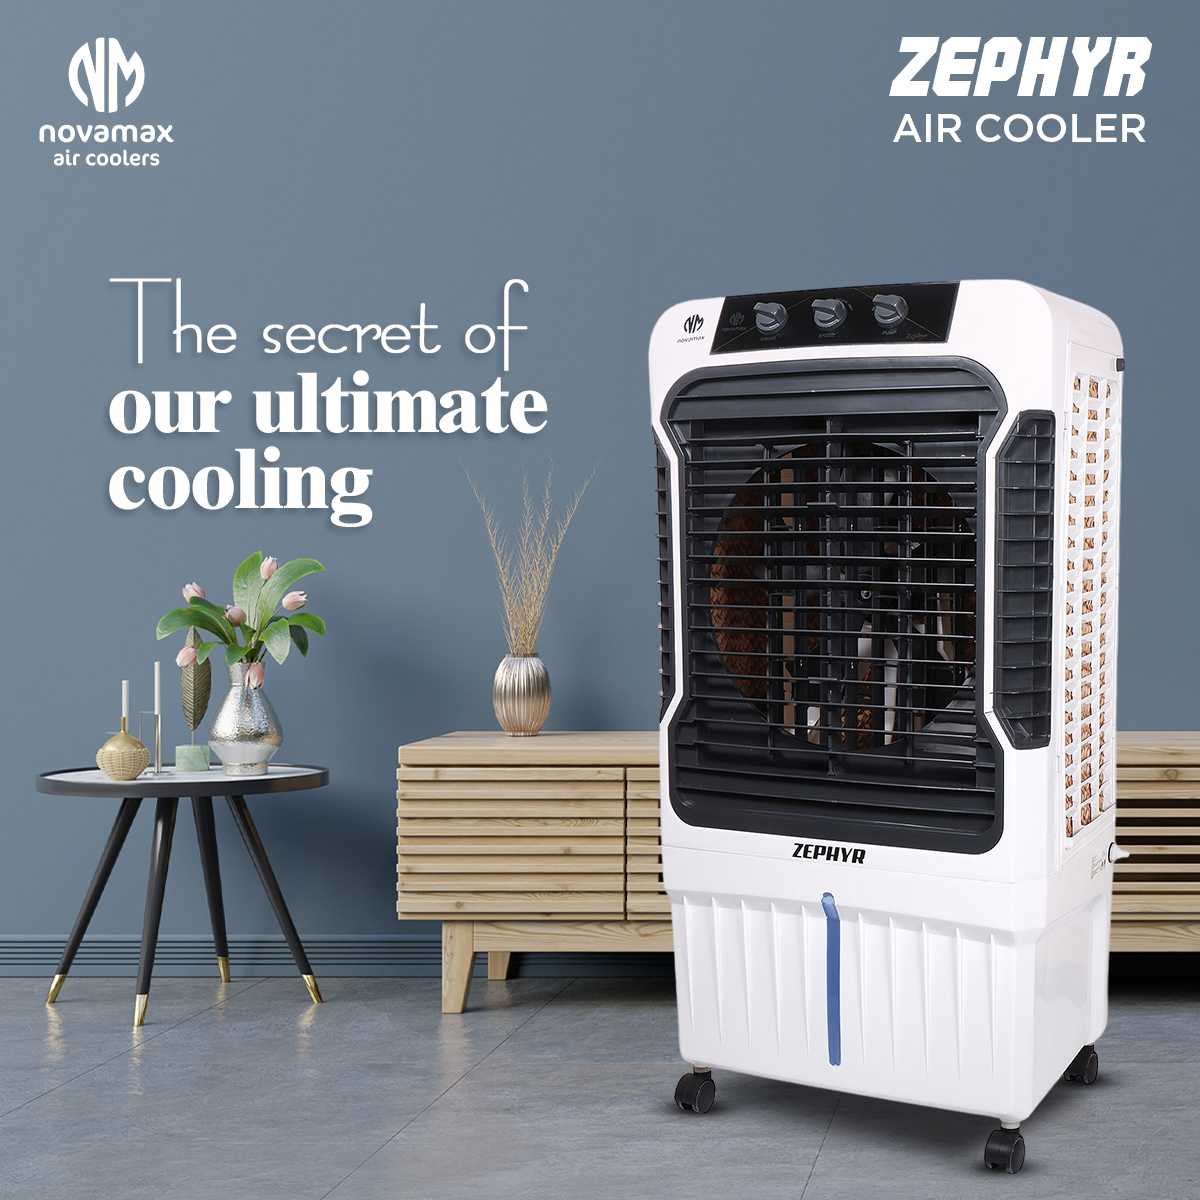 Novamax Zephyr 90 L Desert Air Cooler For Home/Office With 3-Side High Density Honeycomb Cooling Pads, Auto Swing, 4-Way Air Deflection & 3-Speed Control Technology (Black)